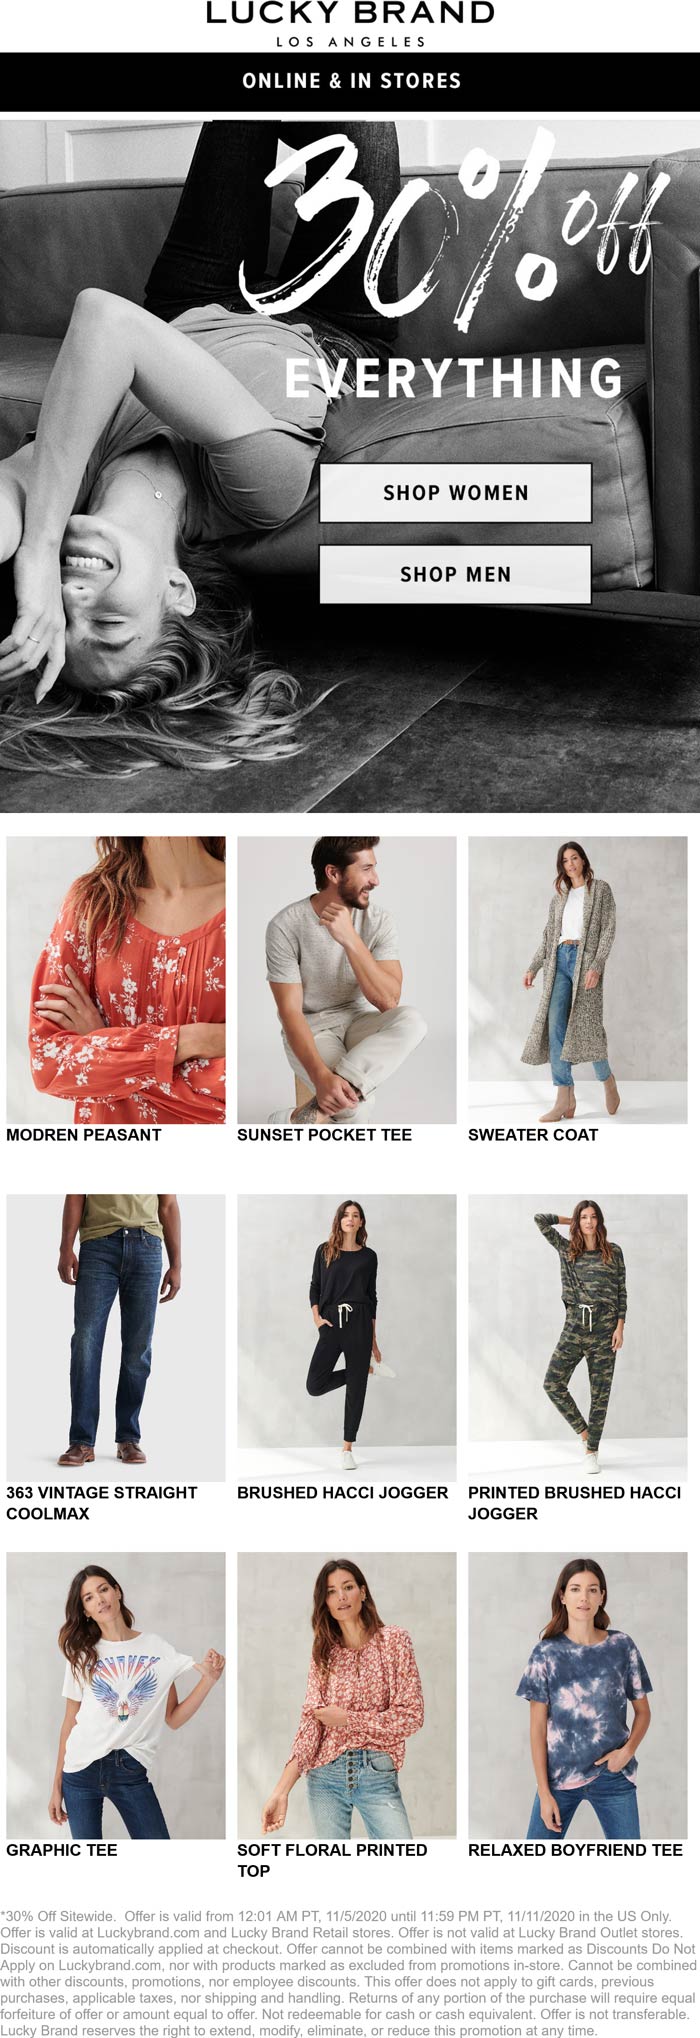 Lucky Brand stores Coupon  30% off everything at Lucky Brand, ditto online #luckybrand 